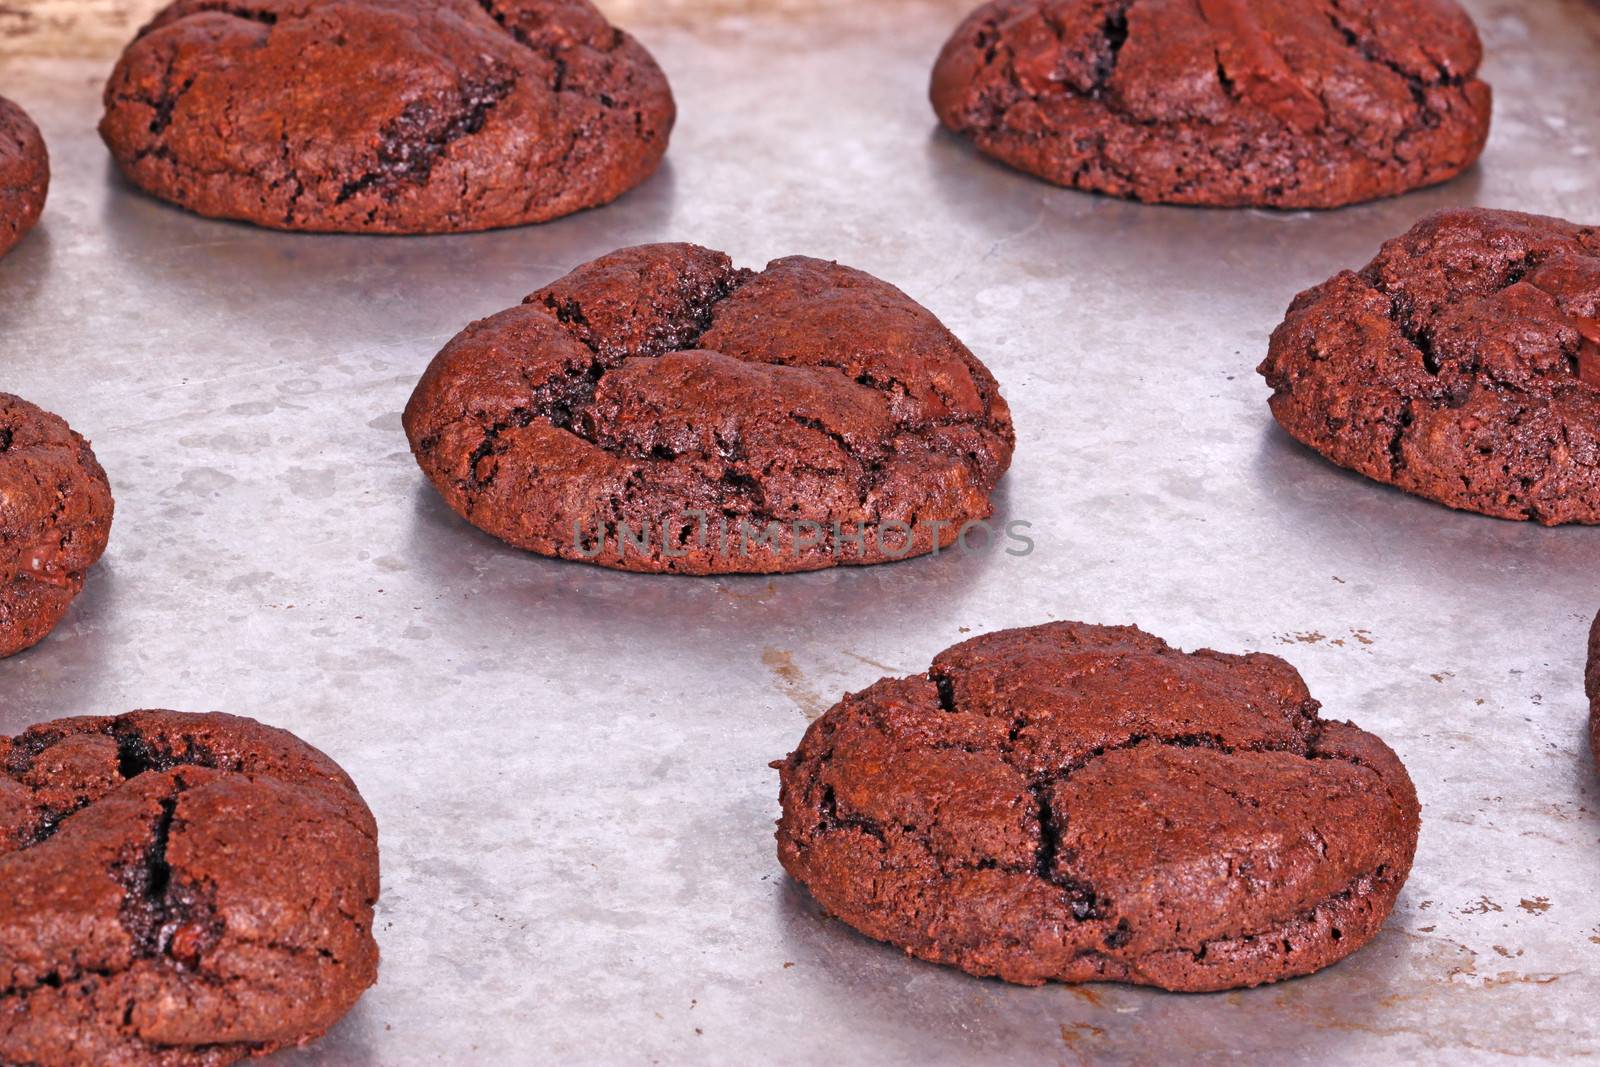 Home-made dark chocolate cookies fresh out of the oven cool down while still on the pan